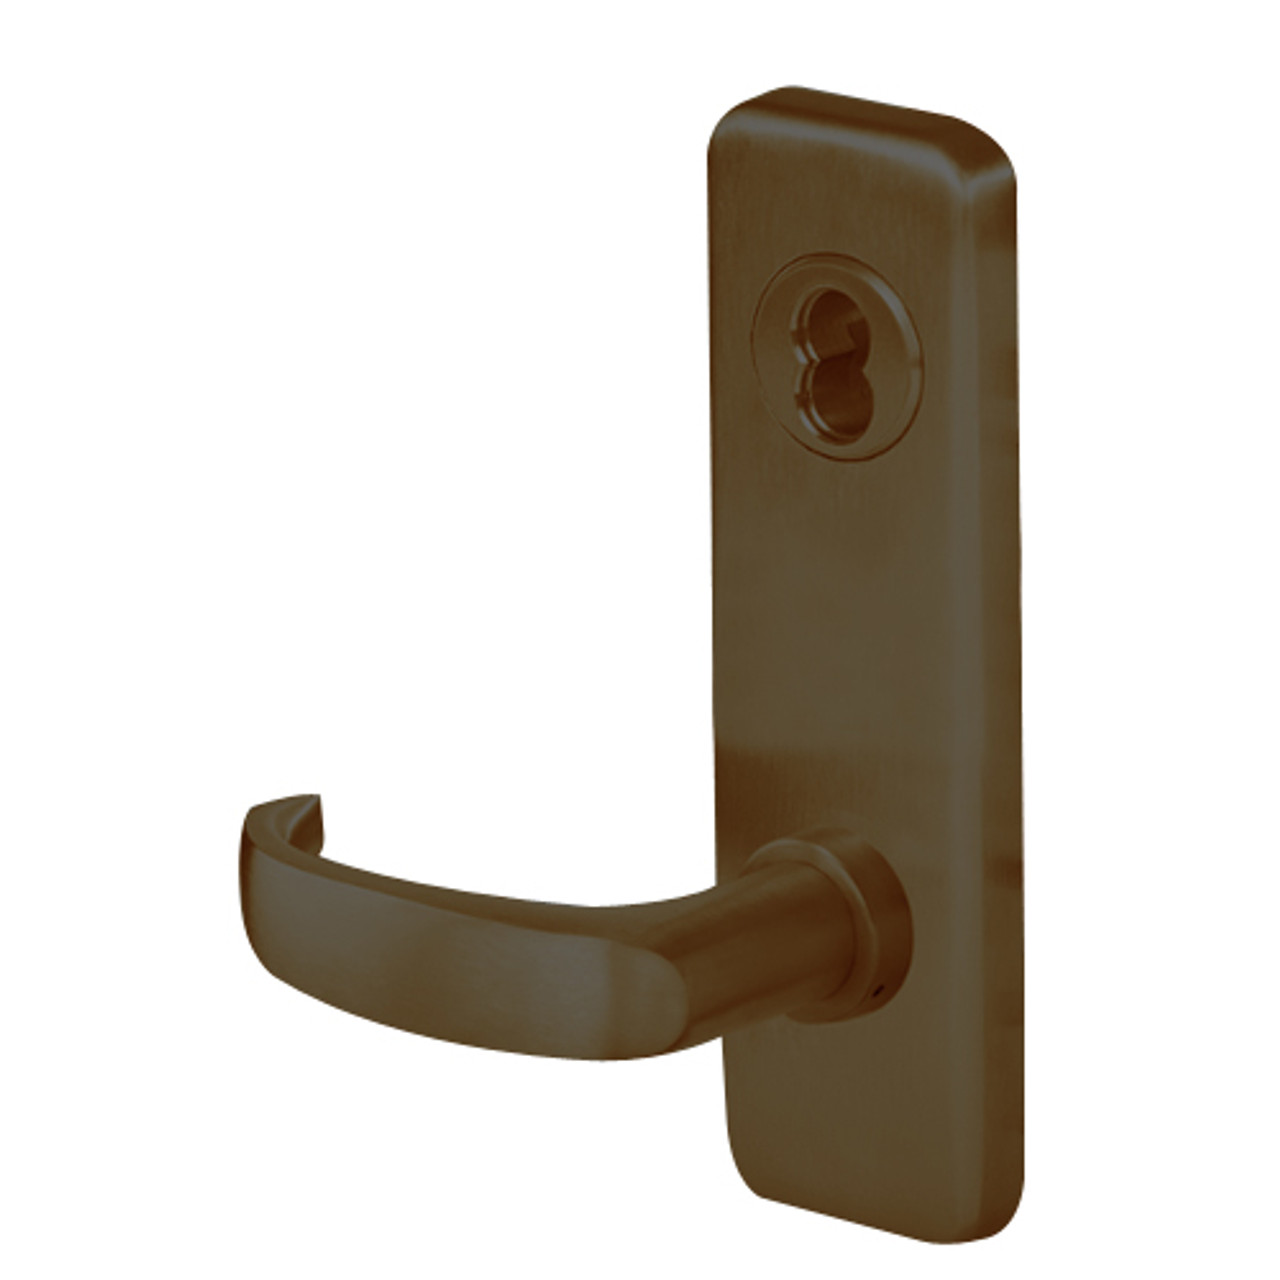 45HW7TWEL14J613 Best 40HW series Double Key Deadbolt Fail Safe Electromechanical Mortise Lever Lock with Curved w/ Return Style in Oil Rubbed Bronze